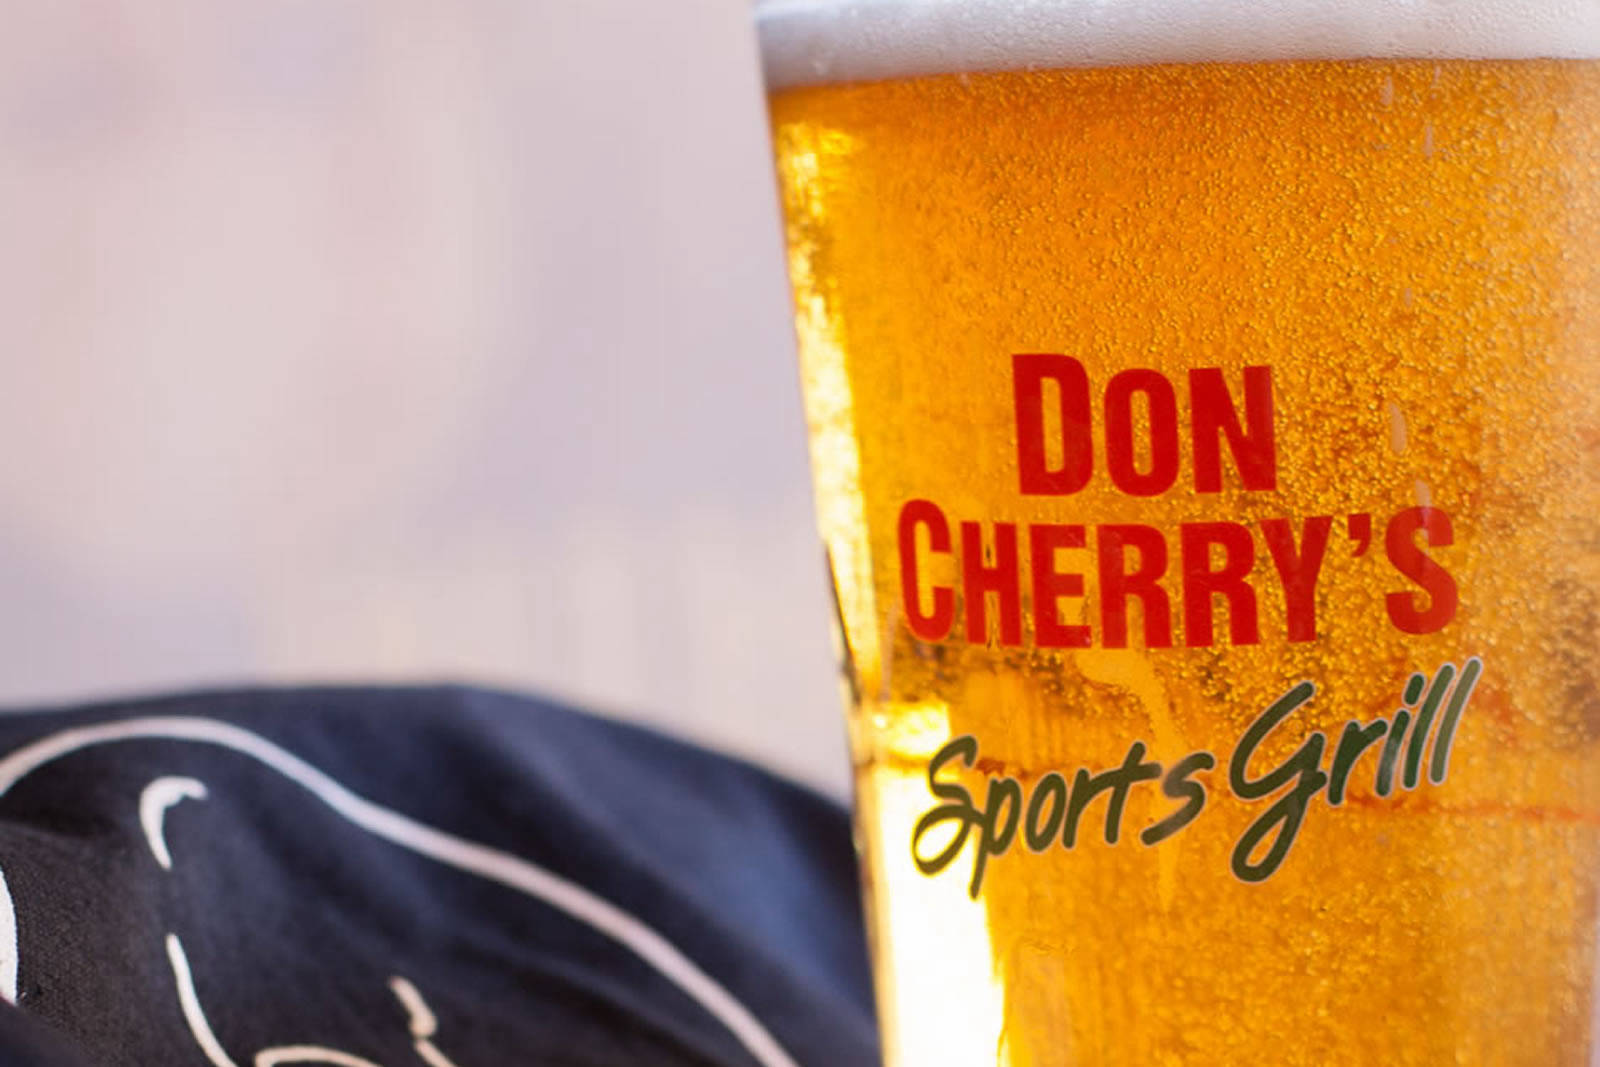 An ice cold draft beer with the Don Cherry's logo on the front.